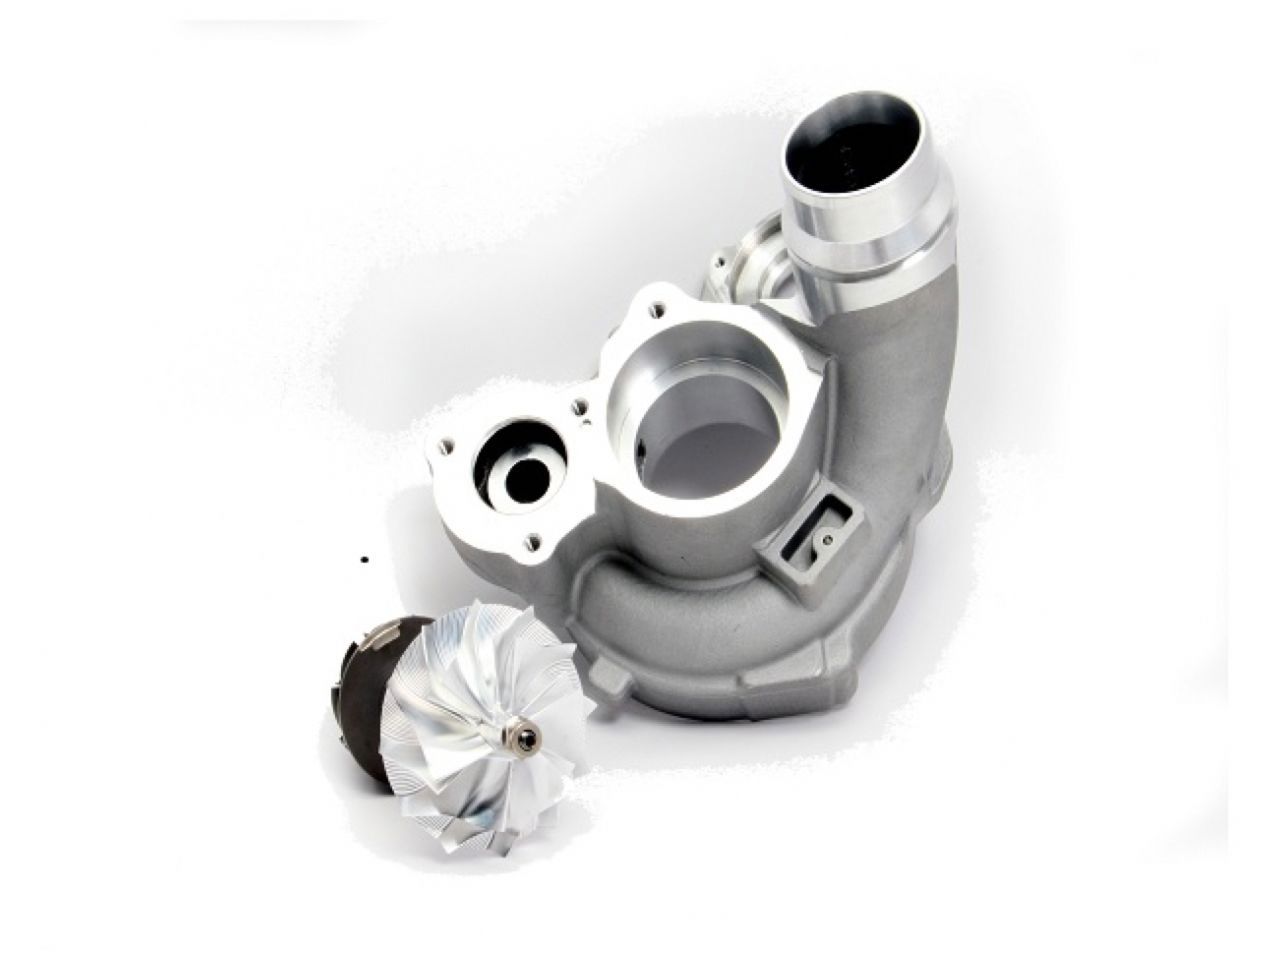 Dinan Upgraded Turbocharger Kit For BMW N55 (EWG) (No Core)